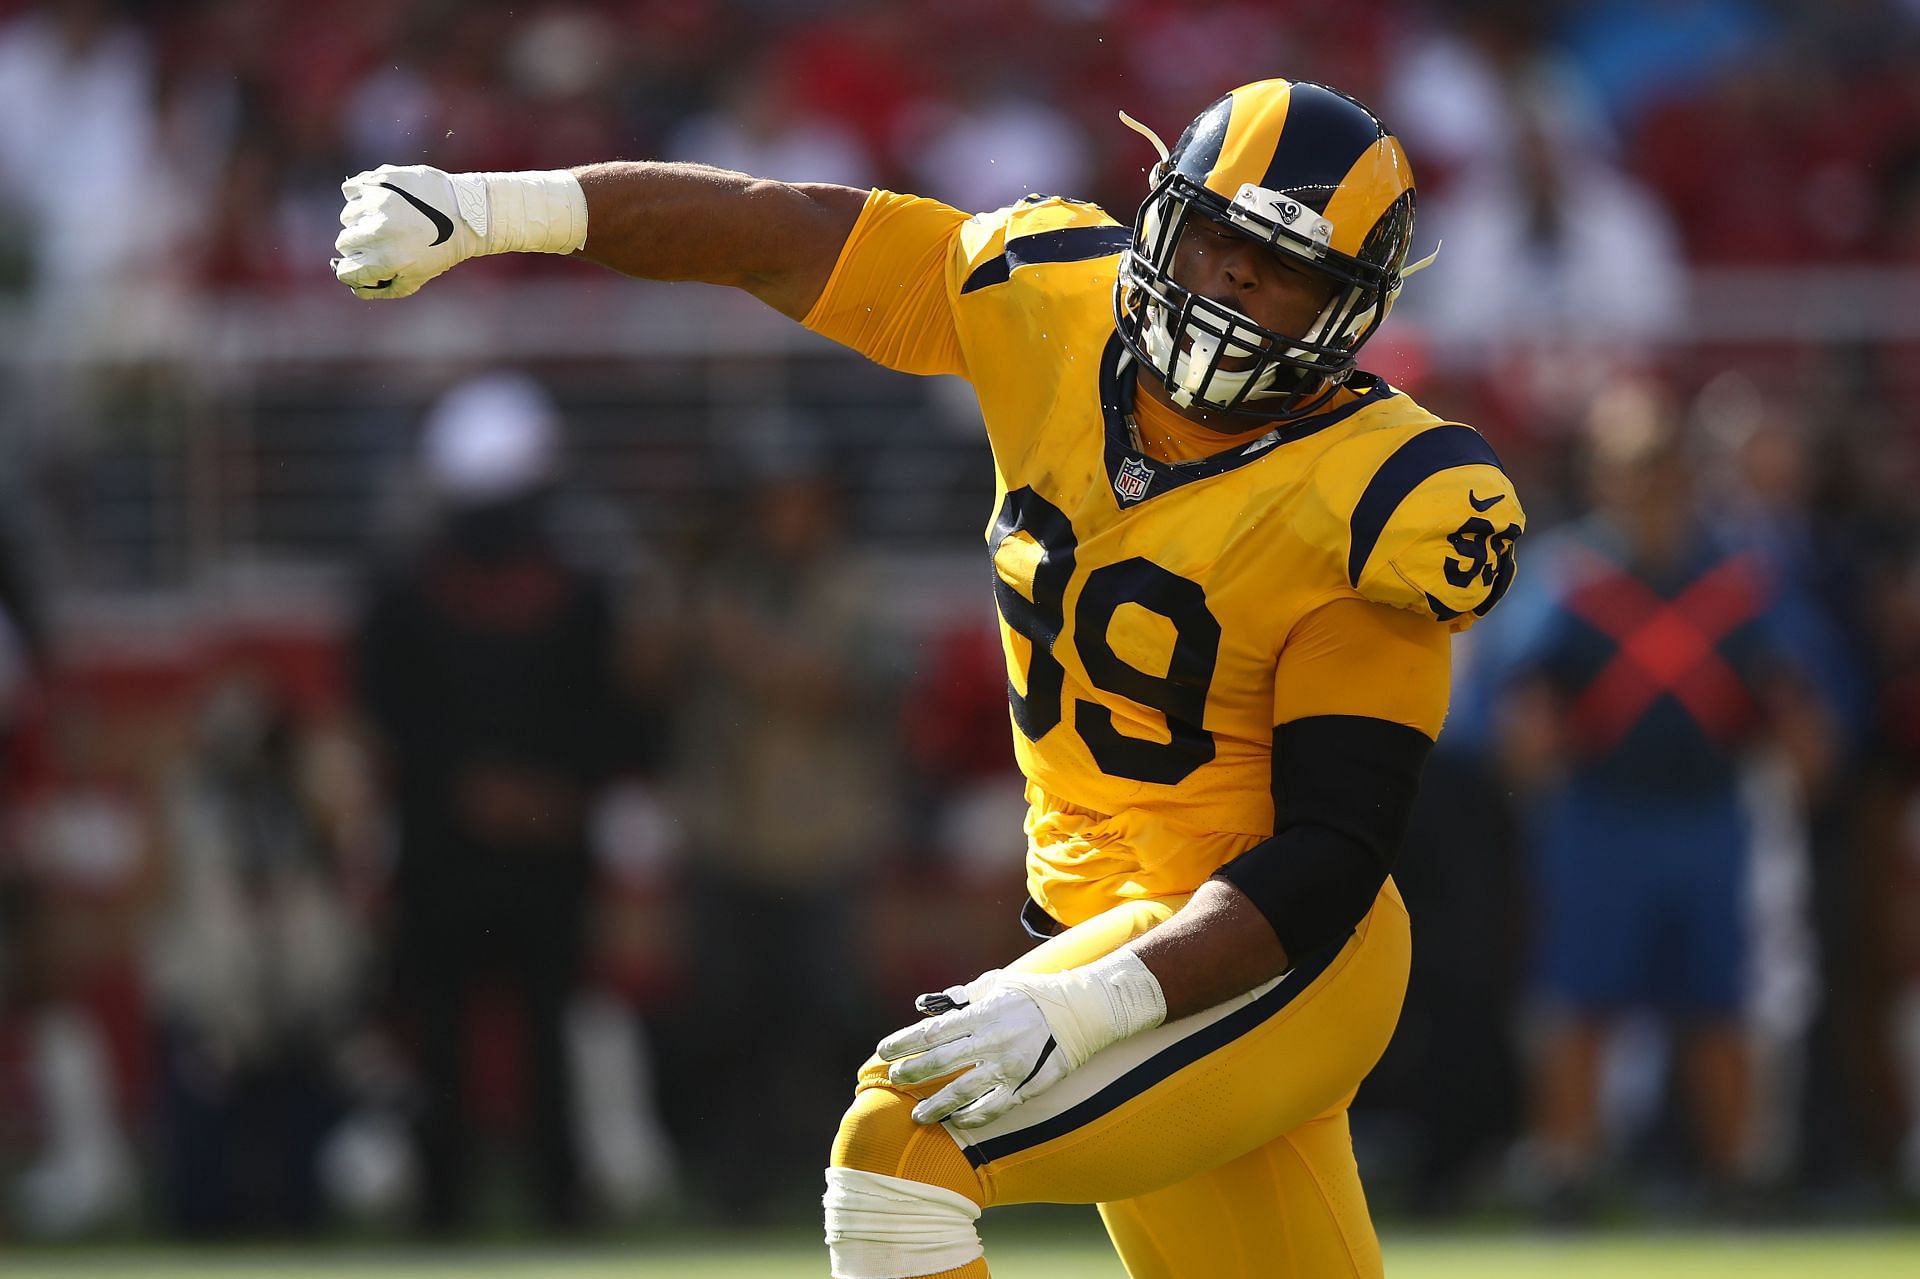 Aaron Donald #99 of the Los Angeles Rams reacts after a sack of C.J. Beathard #3 of the San Francisco 49ers